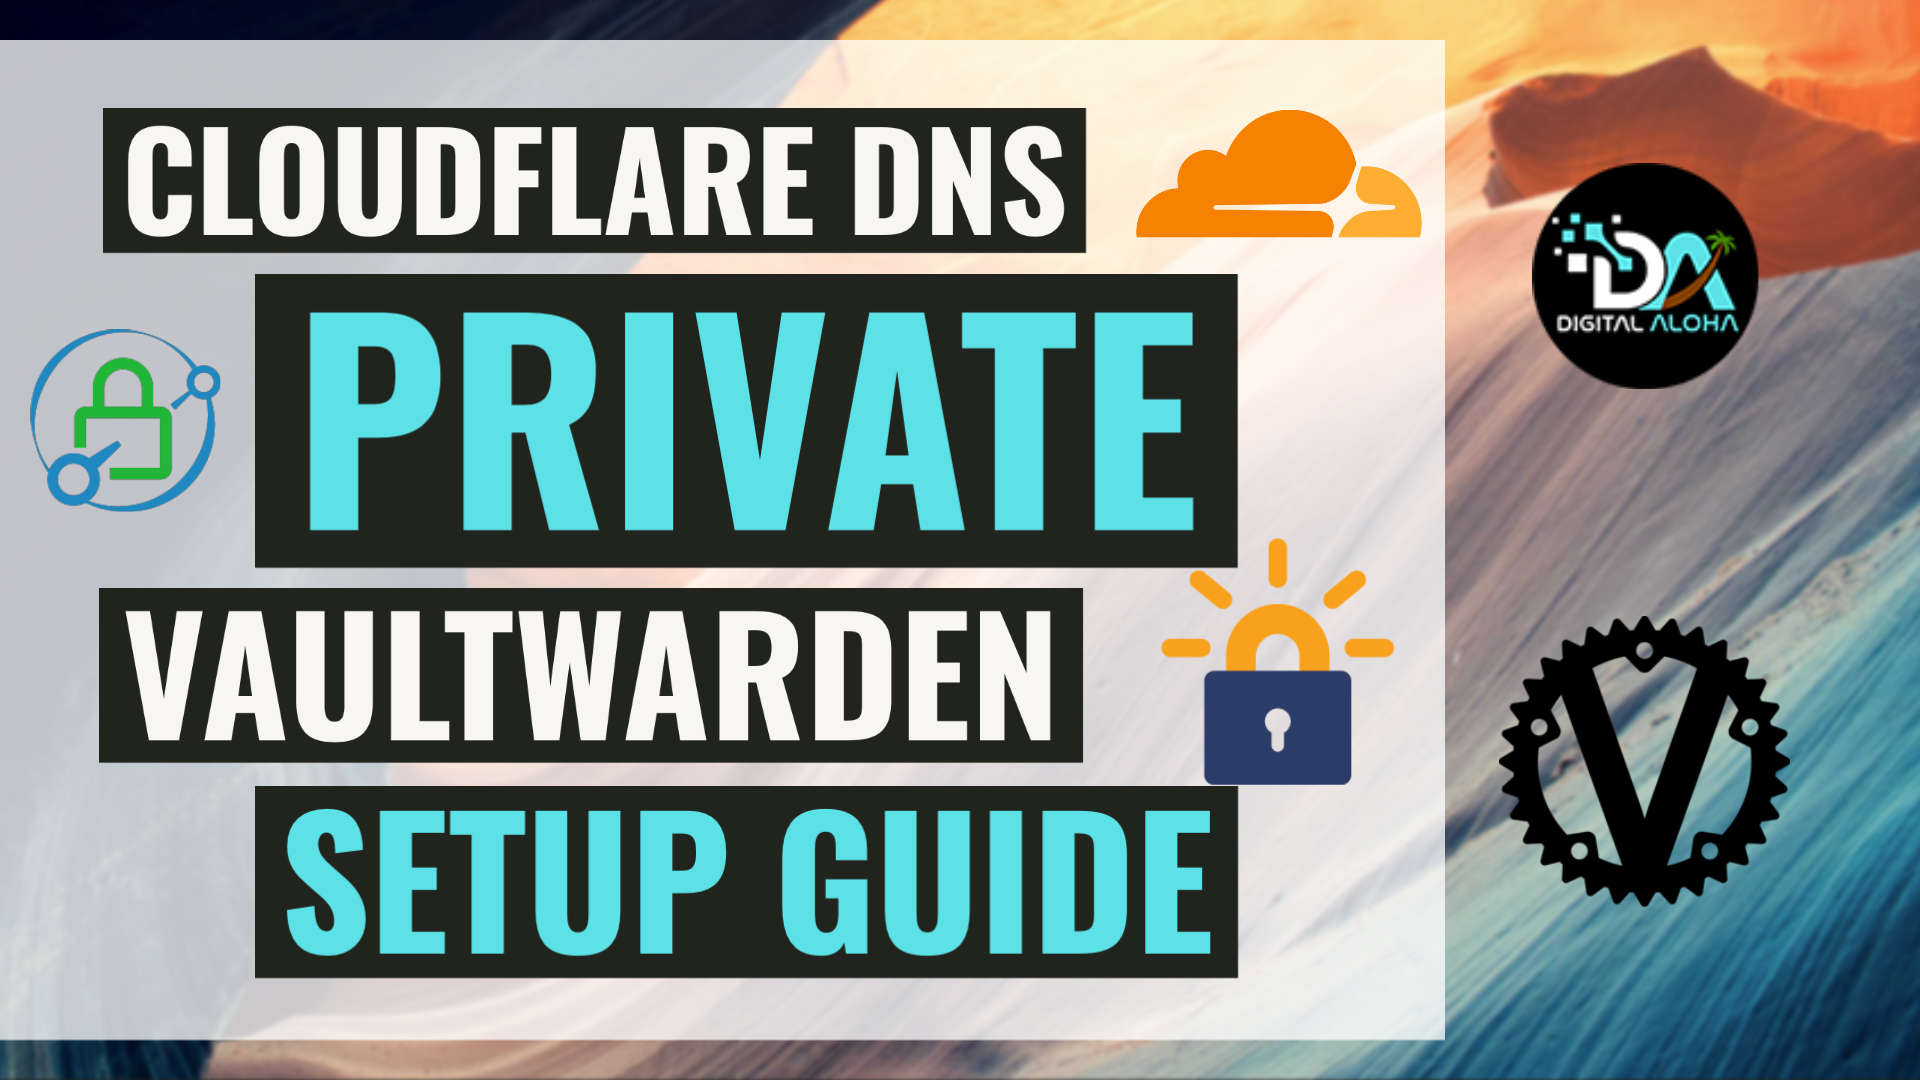 Setup A Private Vaultwarden Instance Using Docker-Compose And Cloudflare DNS On Your Synology NAS